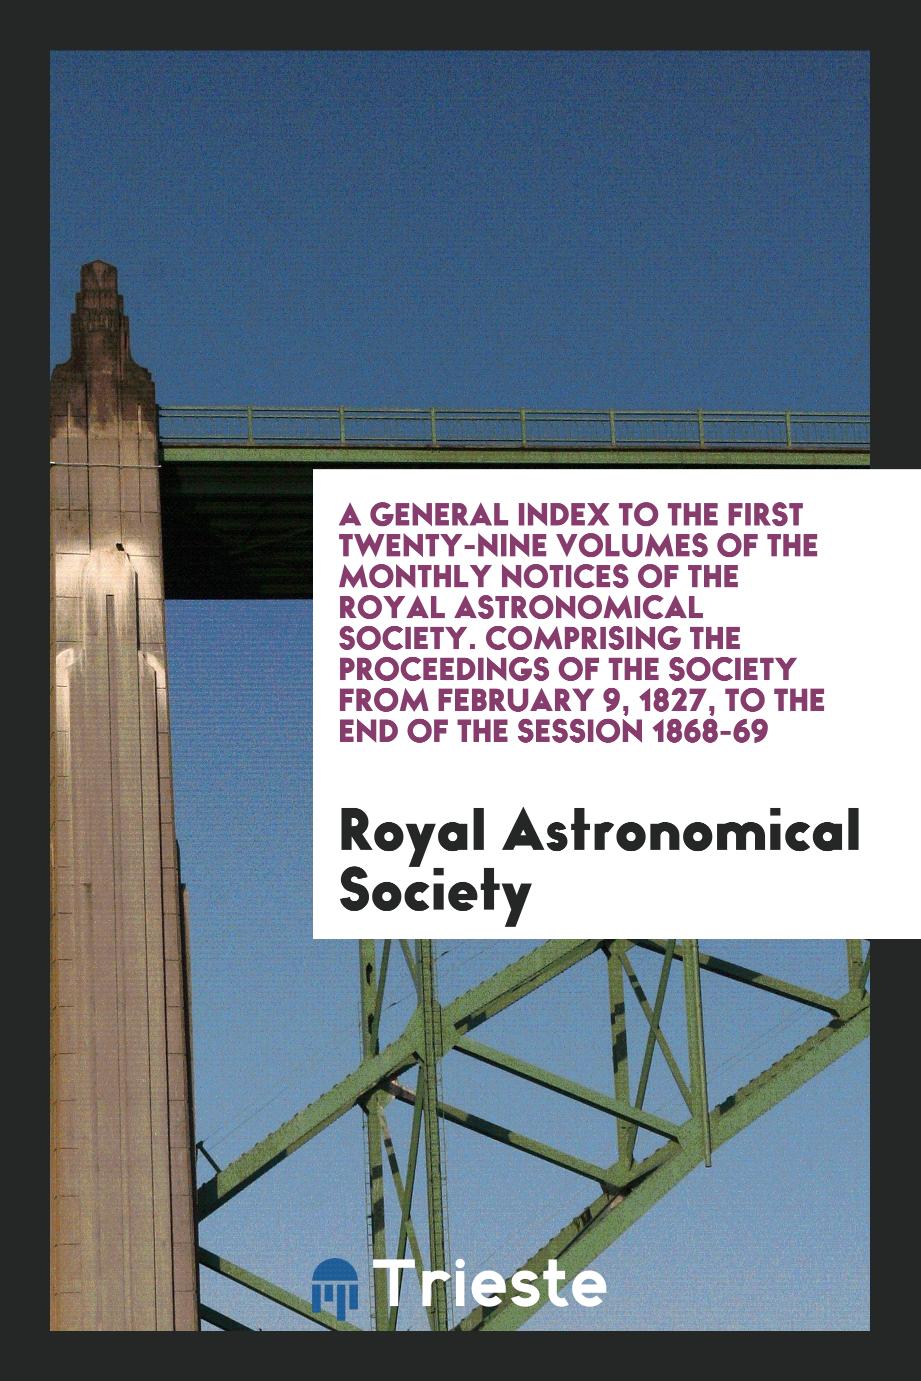 A General Index to the First Twenty-Nine Volumes of the Monthly Notices of the Royal Astronomical Society. Comprising the Proceedings of the Society from February 9, 1827, to the End of the Session 1868-69